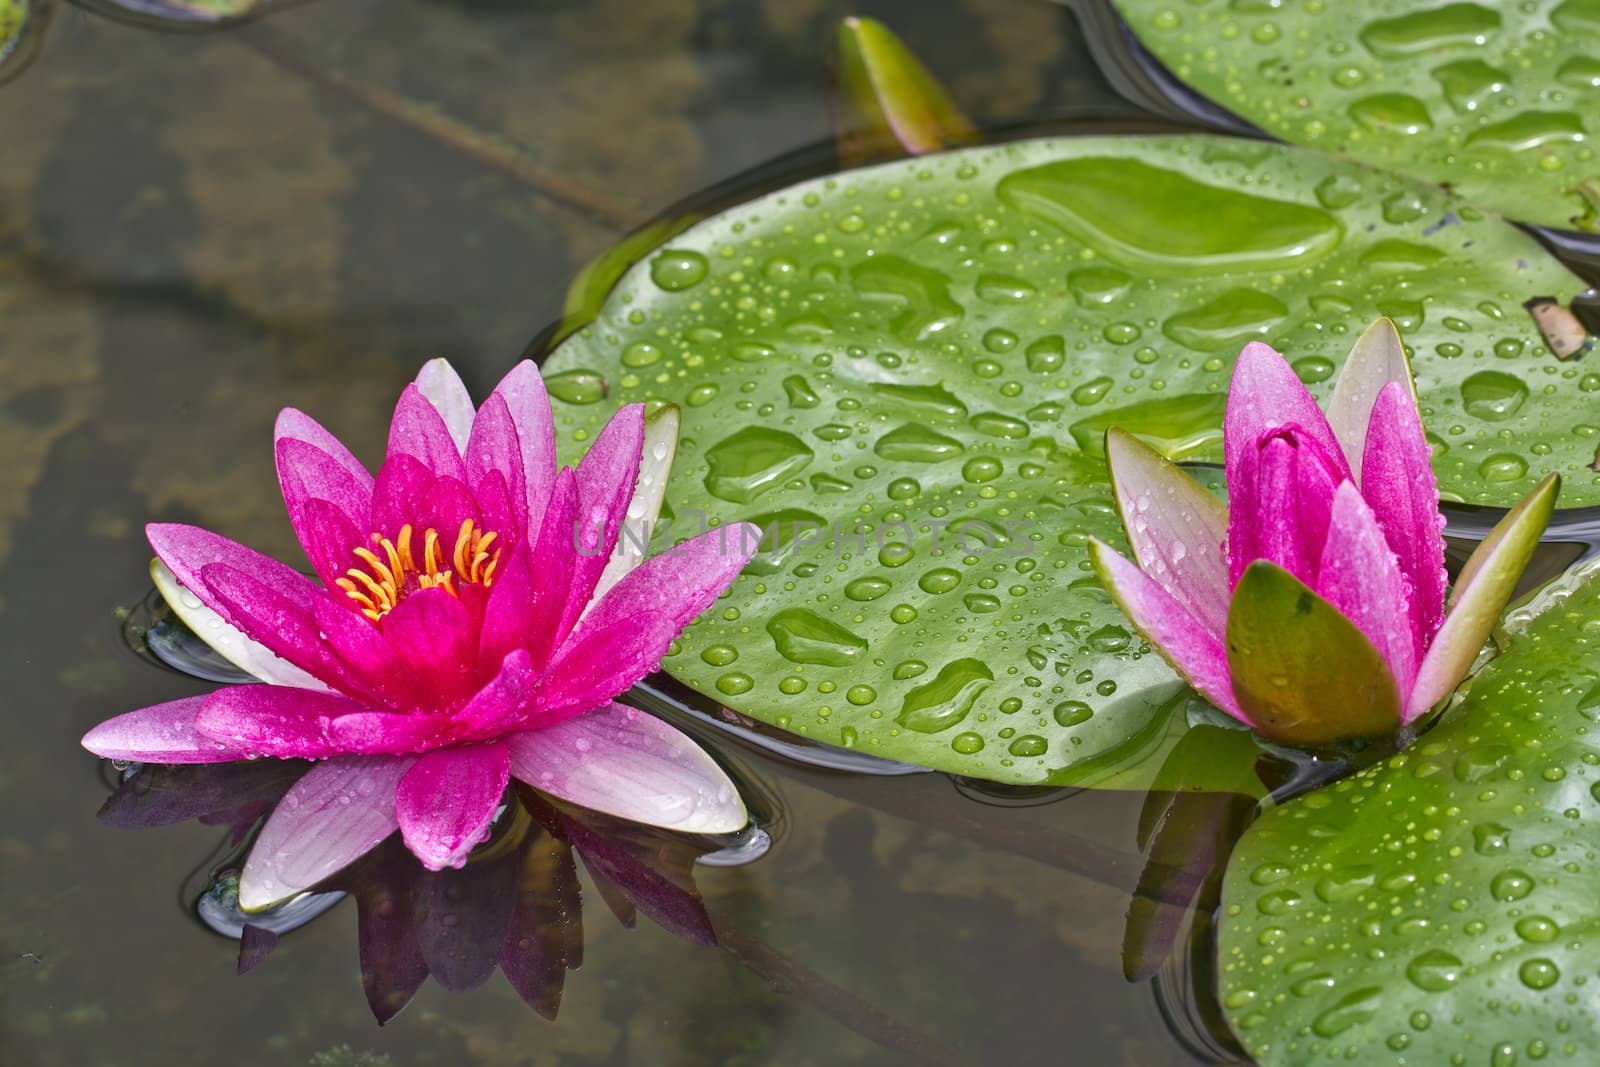 Blooming lotus in the basin after rained